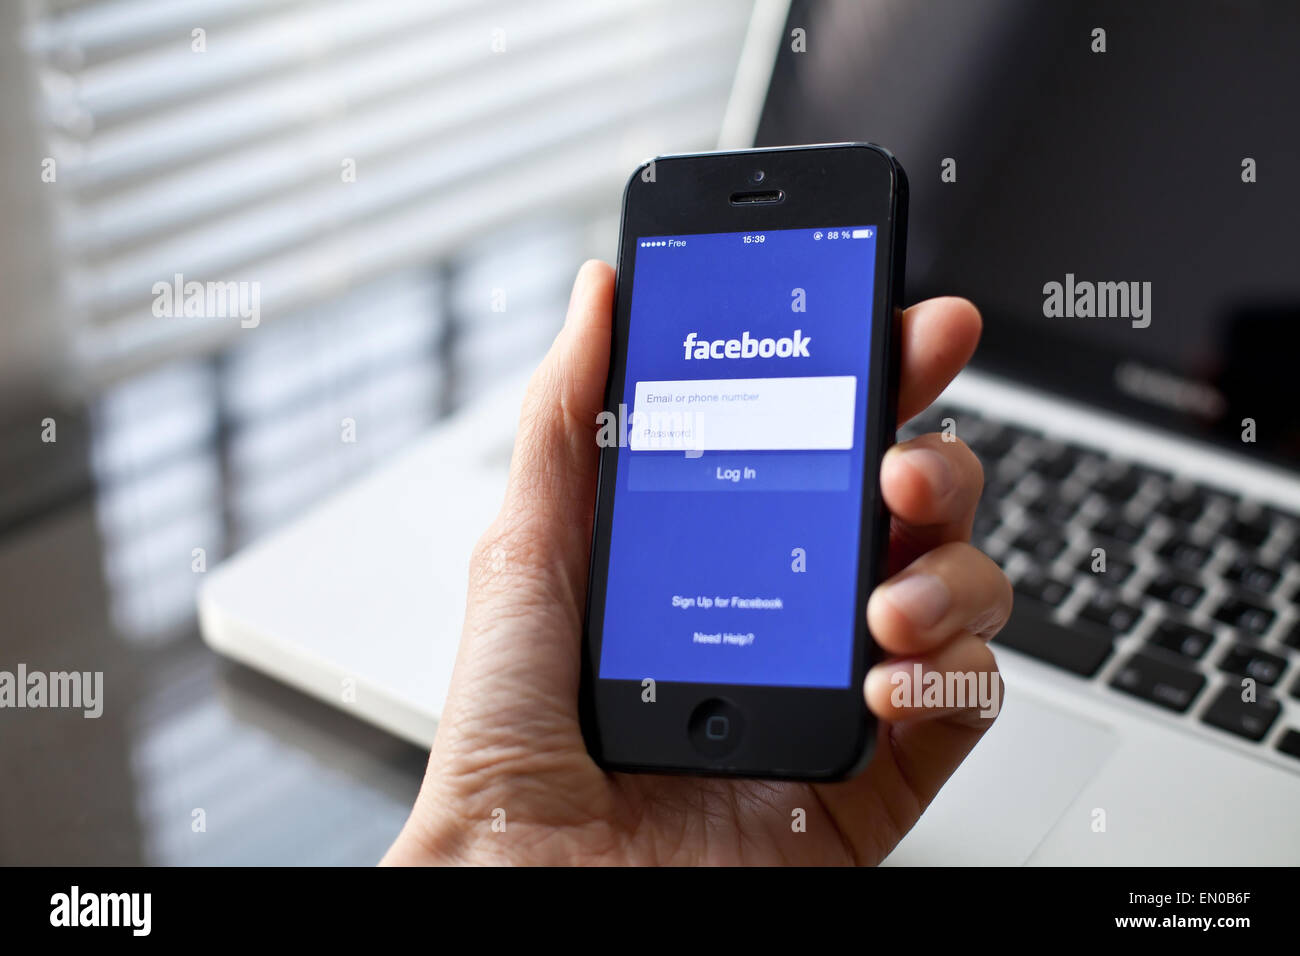 Hand holding Iphone with mobile application for Facebook on the screen, laptop on background Stock Photo